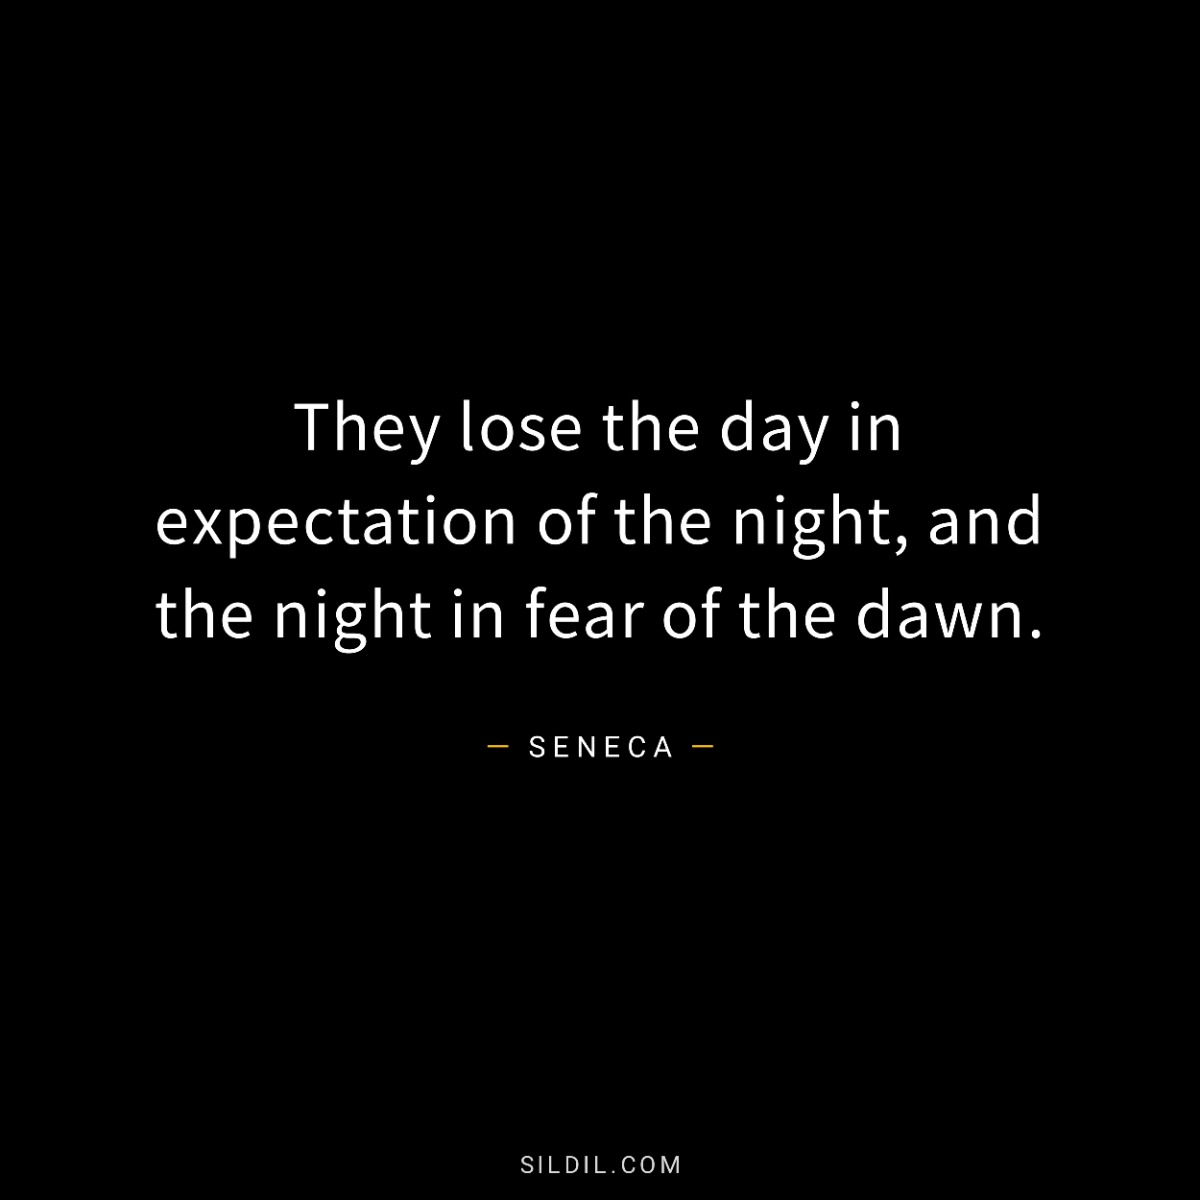 They lose the day in expectation of the night, and the night in fear of the dawn.